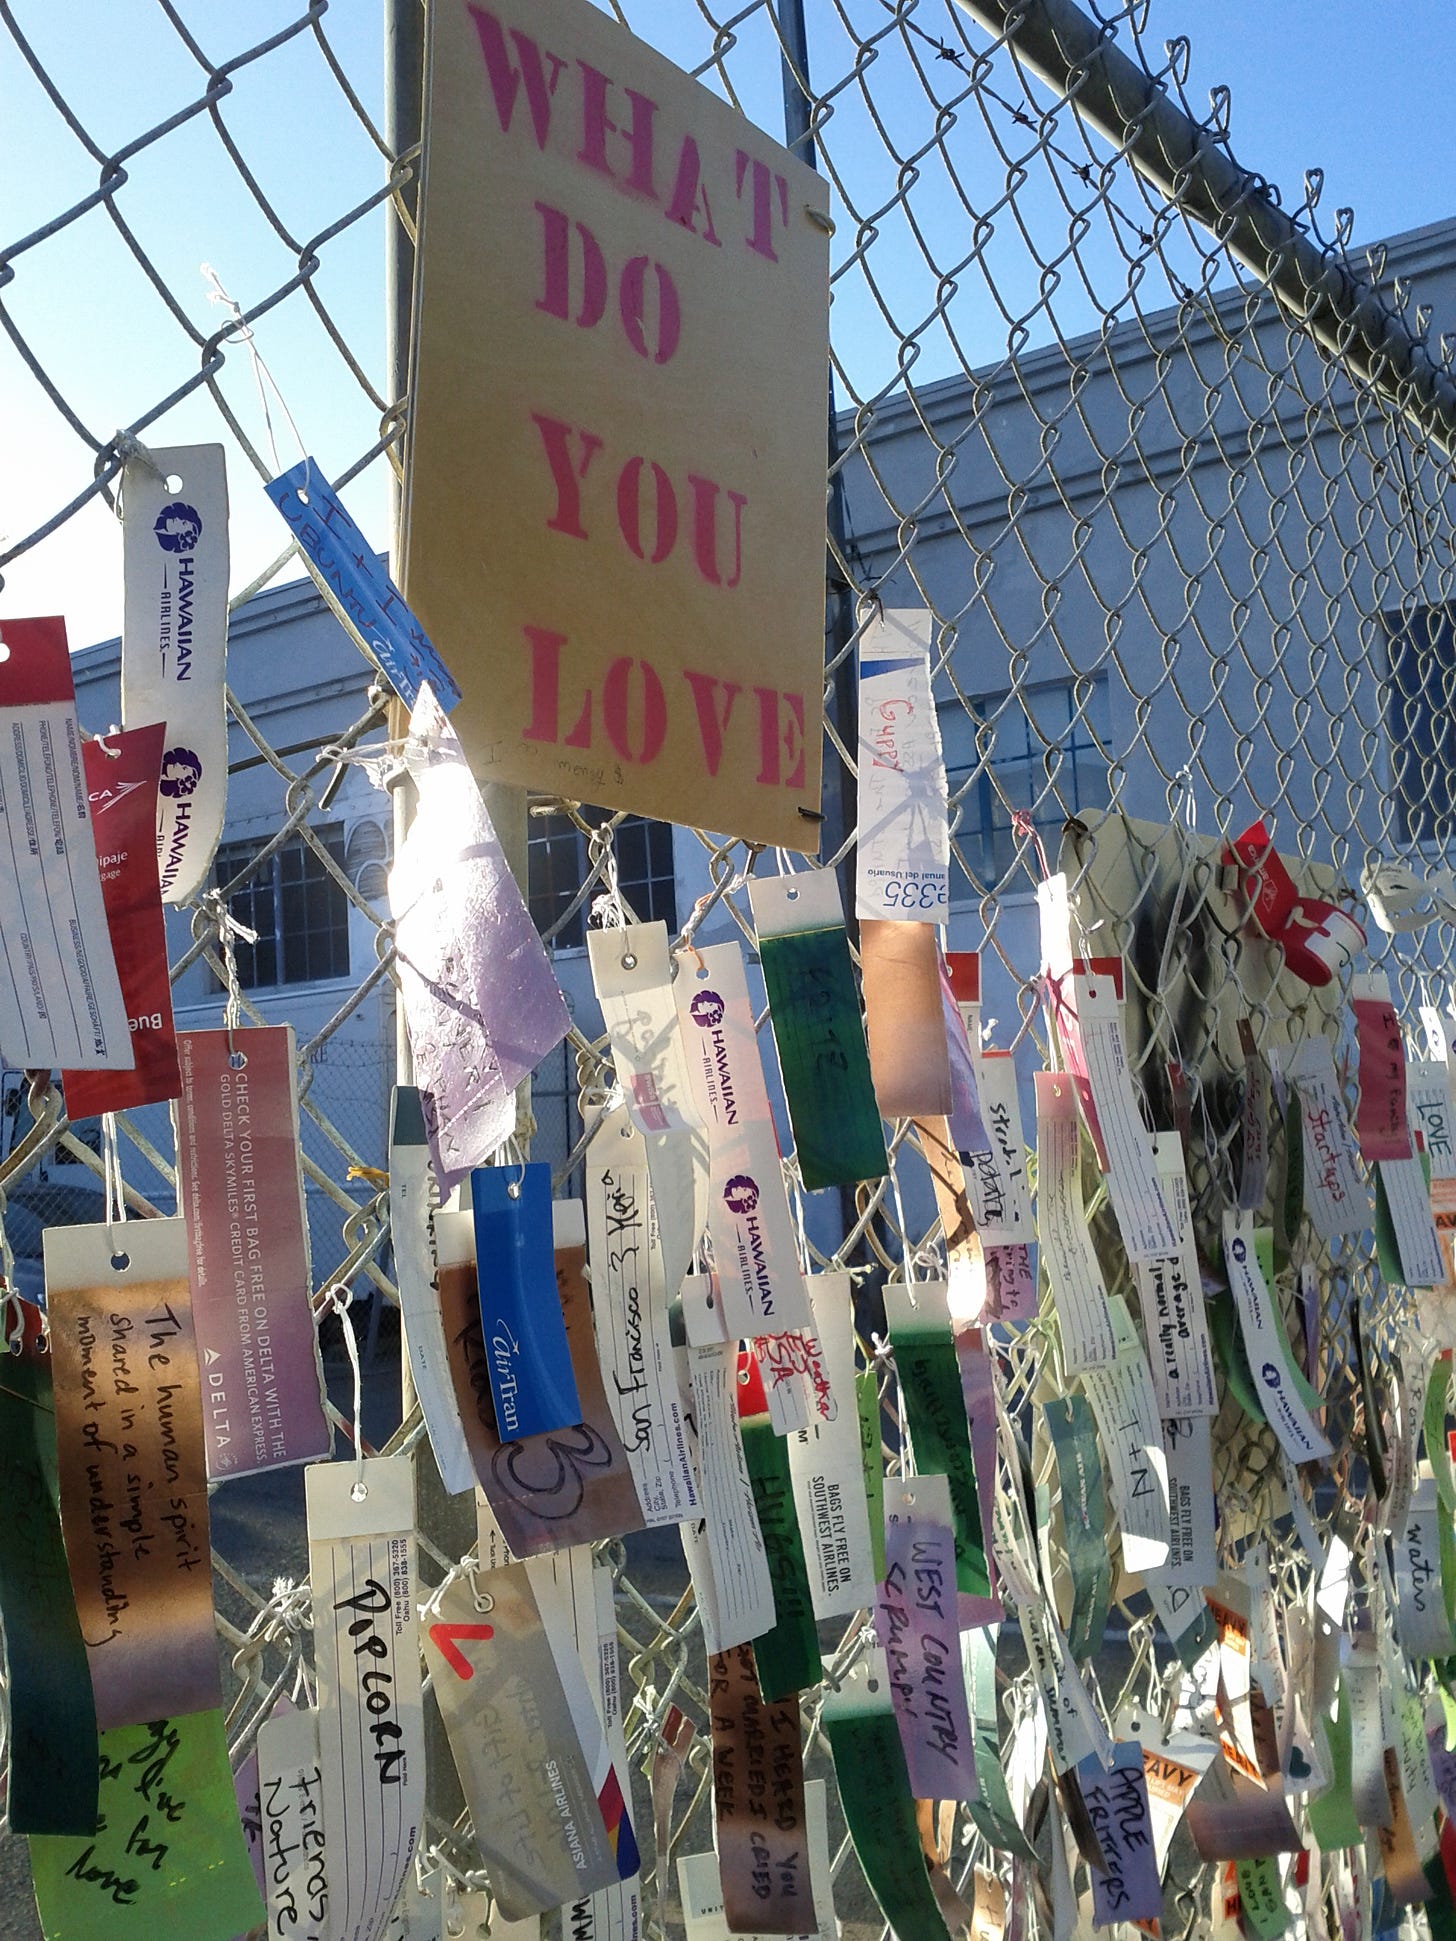 photograph of a chain link fence with a sign that says "what do you love" and many notes tied to the fence